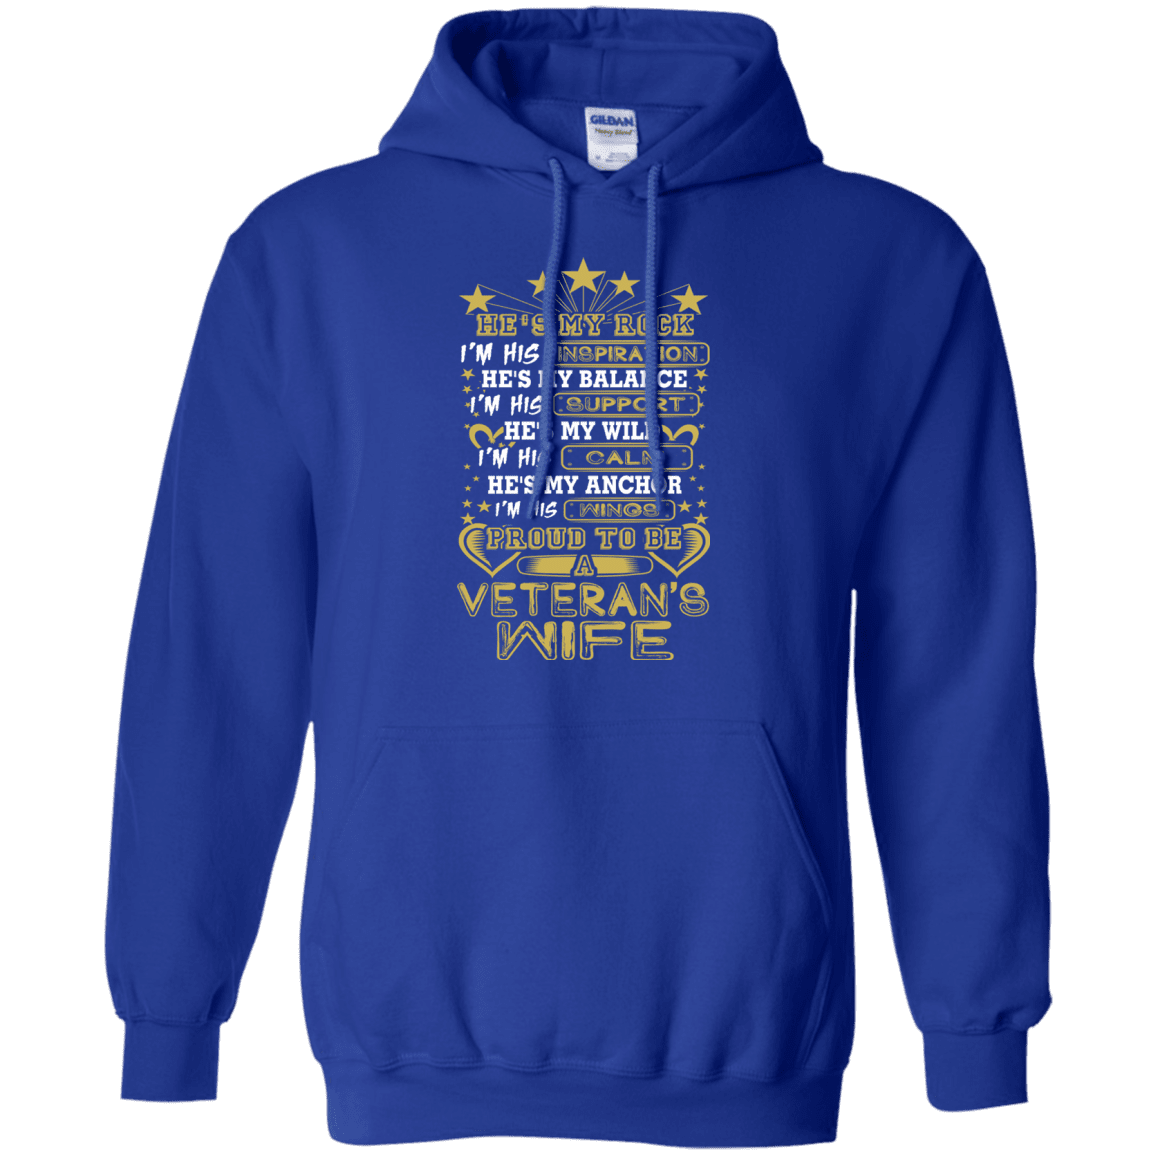 Military T-Shirt "PROUD TO BE A VETERAN'S WIFE"-TShirt-General-Veterans Nation